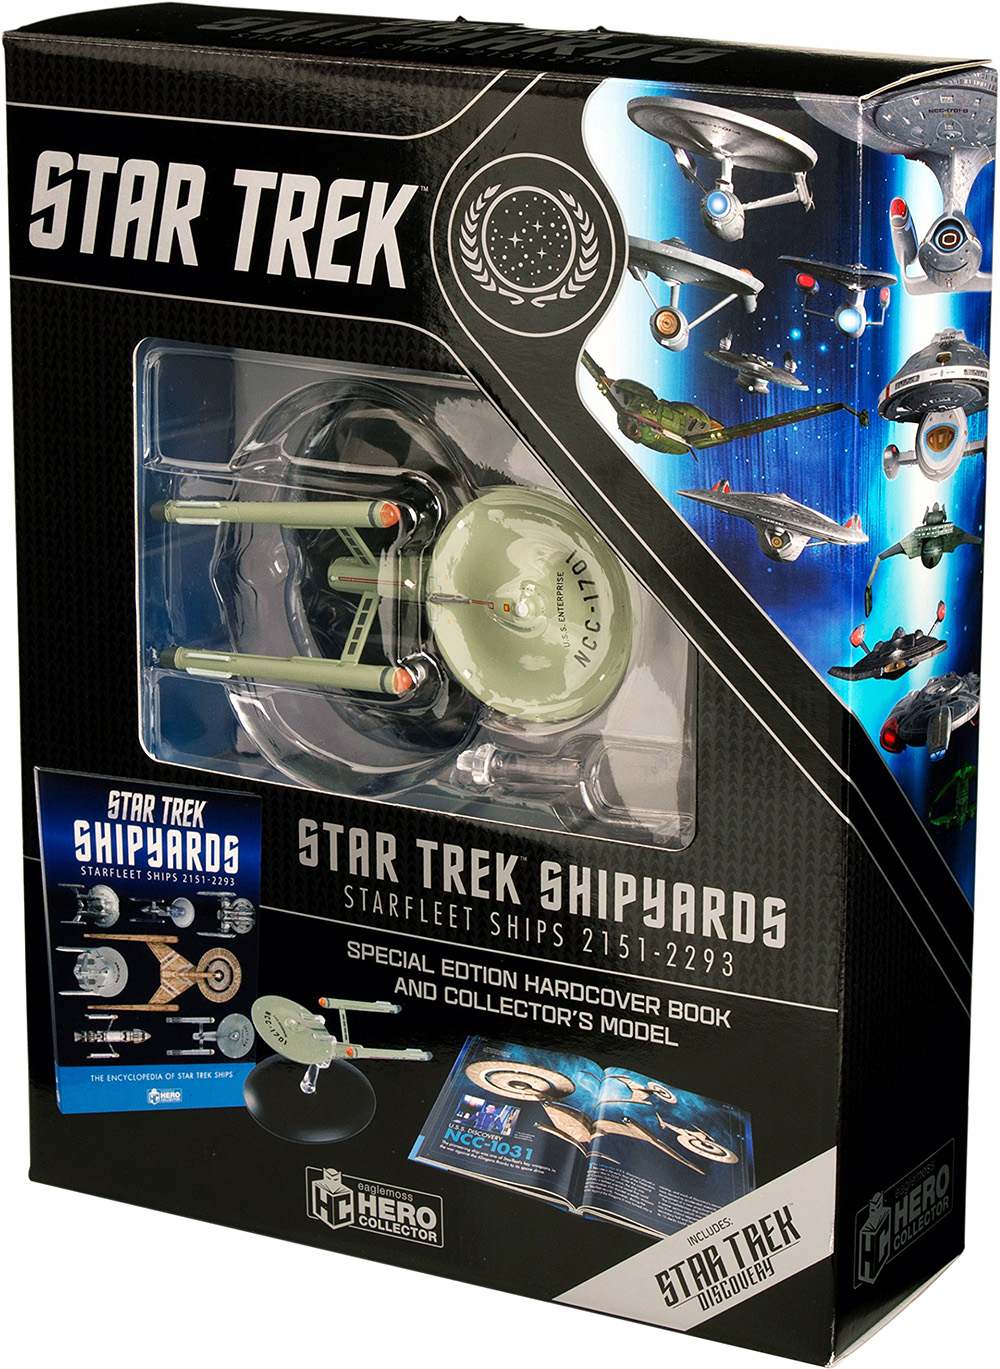 Star Trek Shipyards: Starfleet Ships 2151-2293 - Boxed edition with collectable